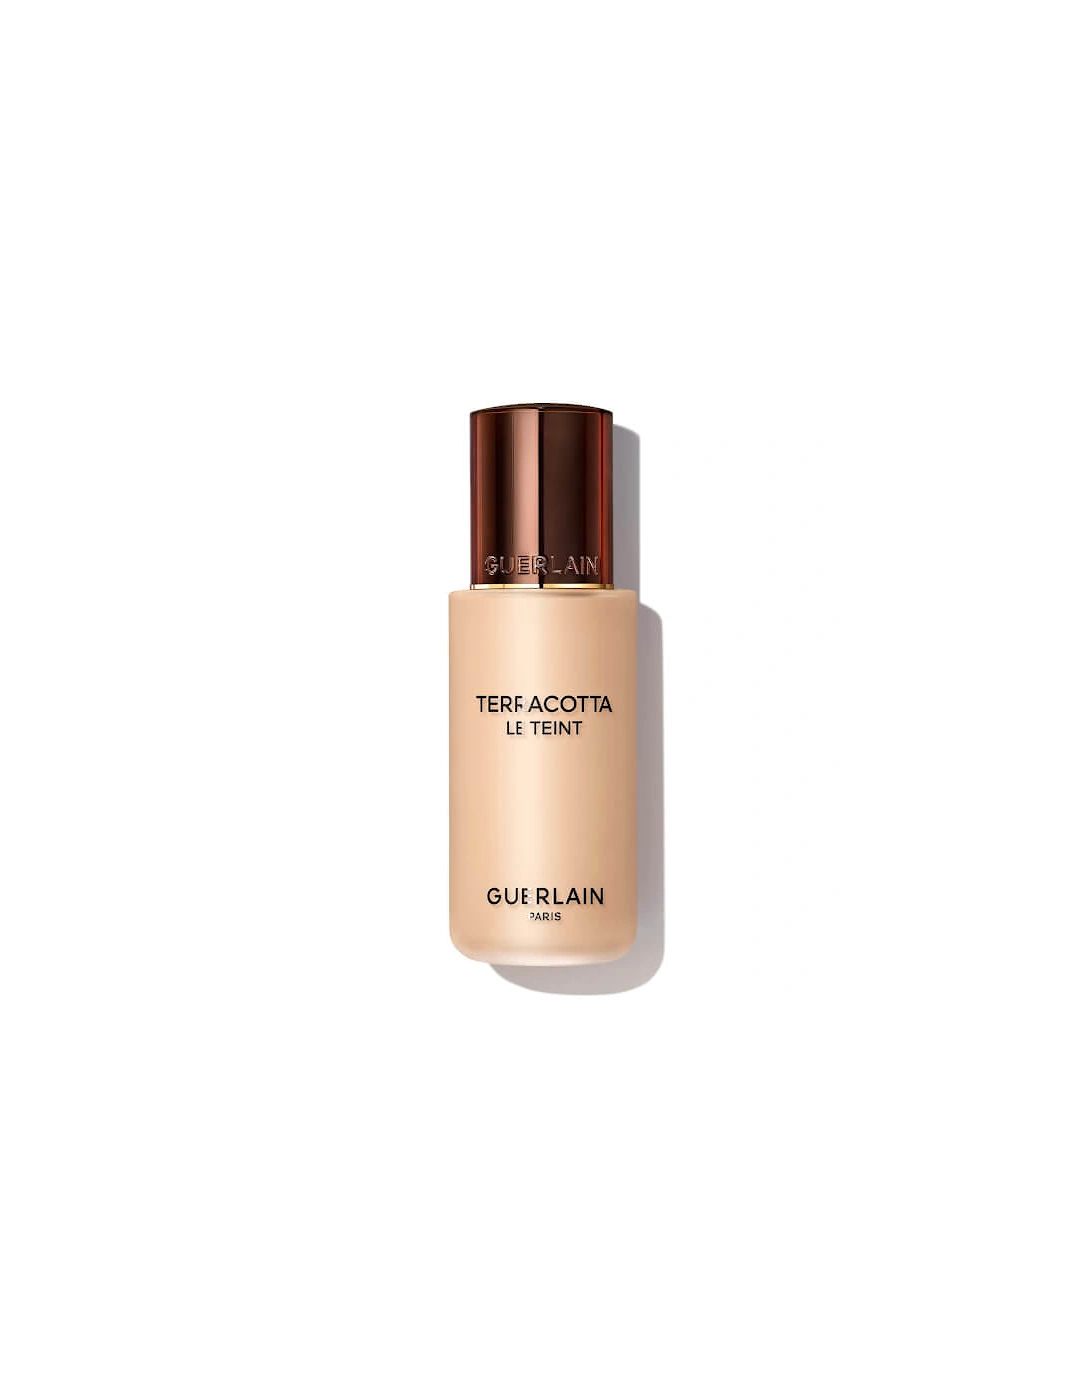 Terracotta Le Teint Healthy Glow Natural Perfection Foundation - 2W, 2 of 1